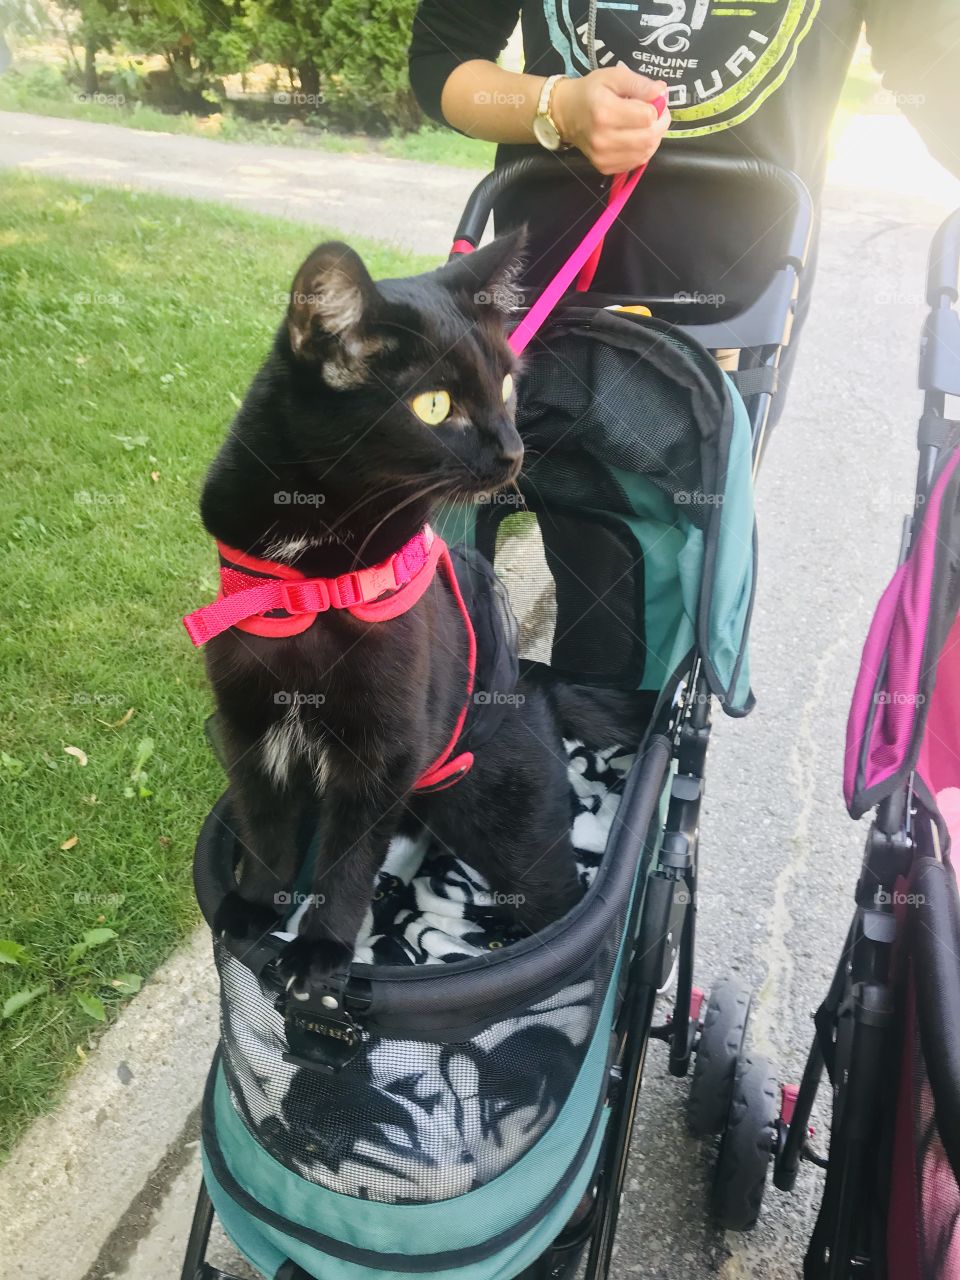 Sweet kitty cat sitting in stroller enjoying the afternoon sunshine warmth! 